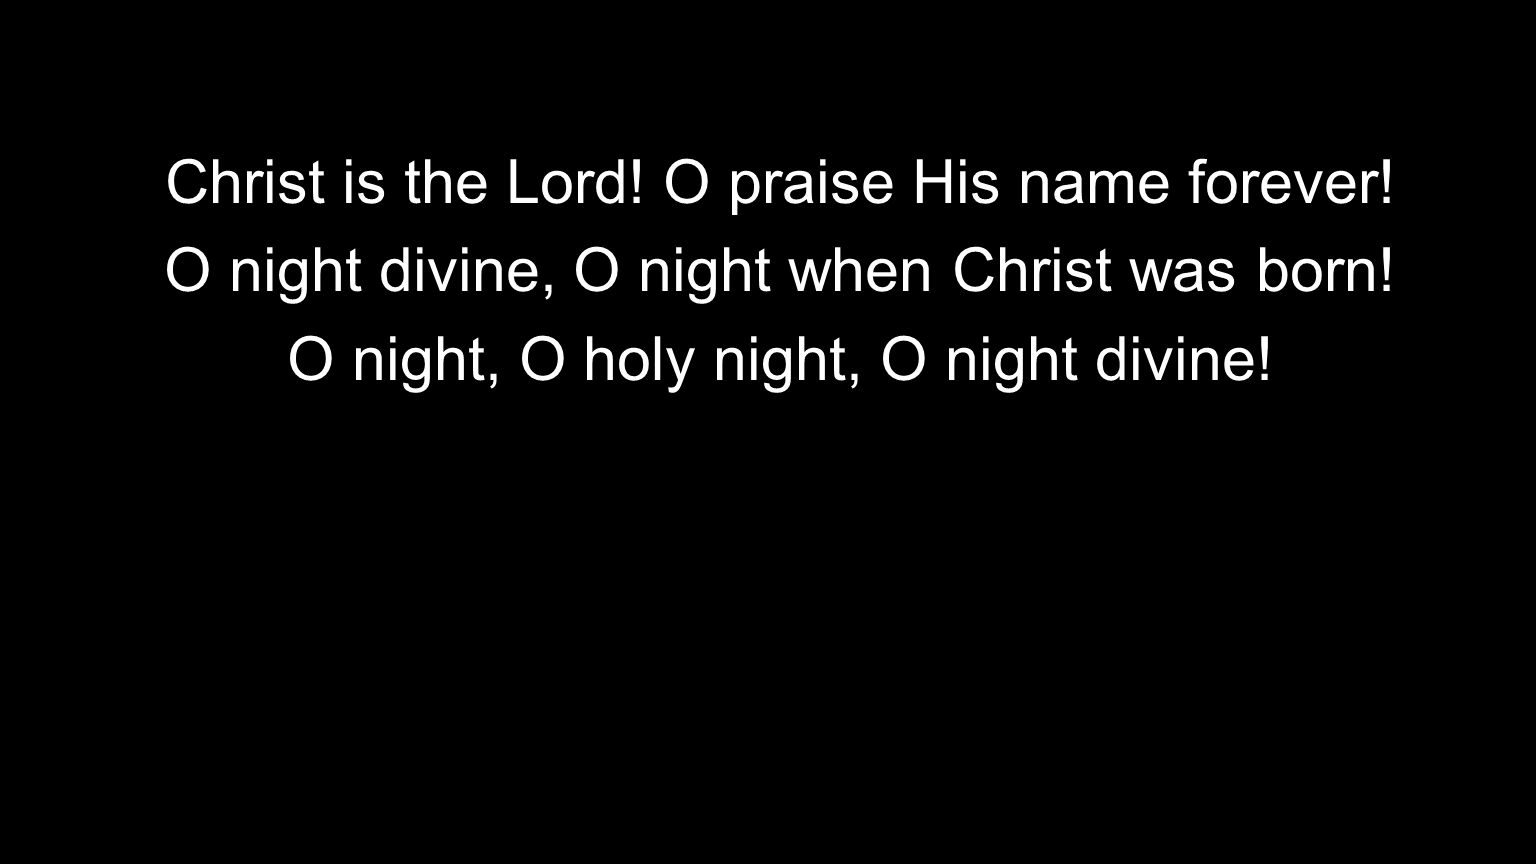 Christ is the Lord! O praise His name forever!